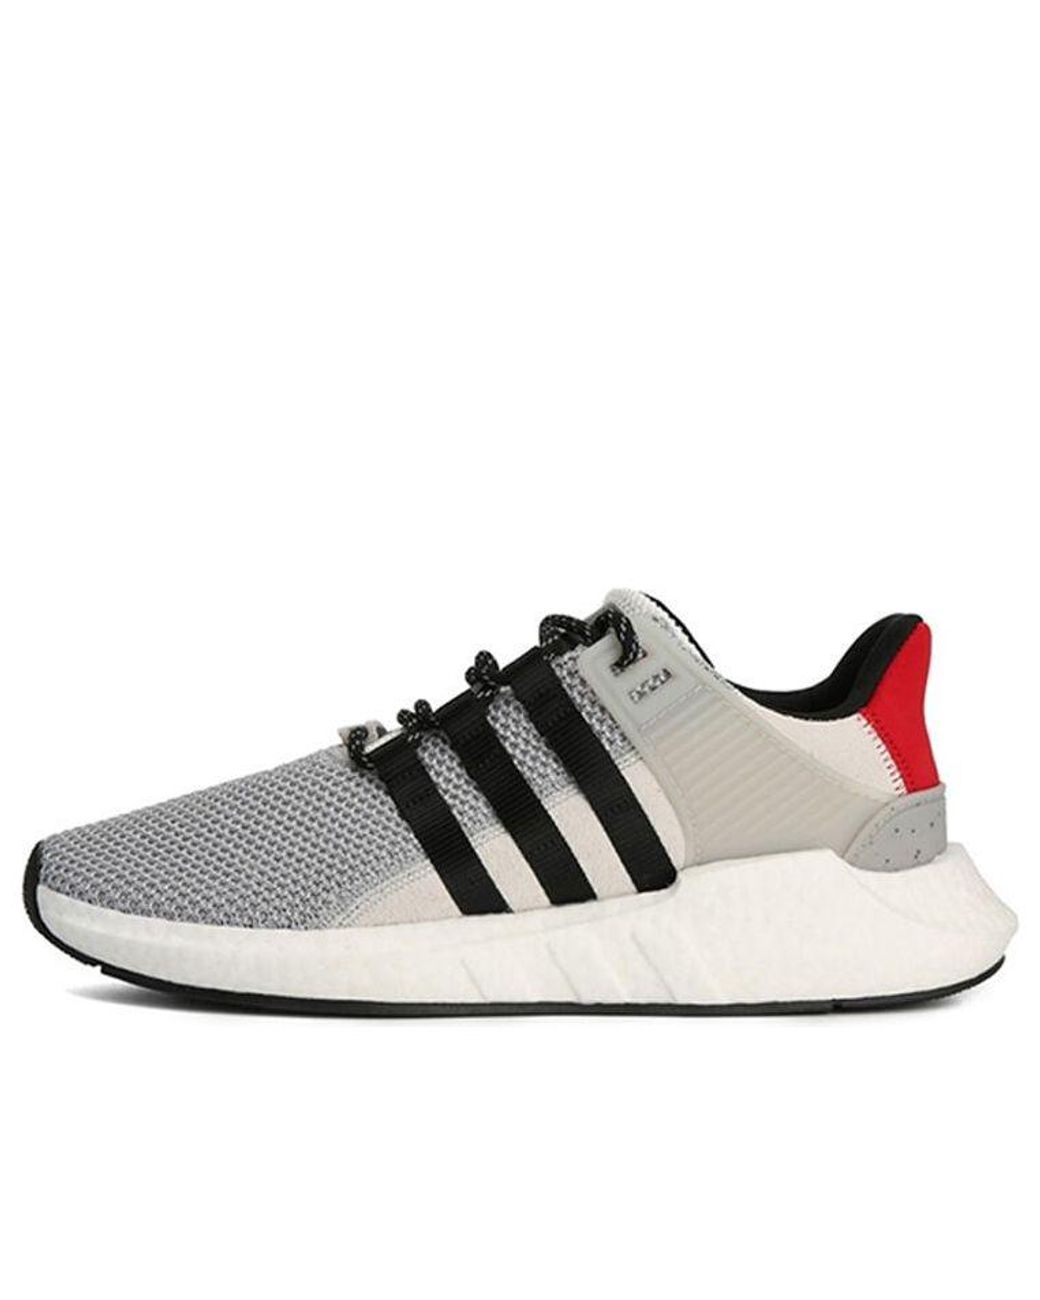 adidas Eqt Support 93/17 'grey Black Scarlet' in White for Men | Lyst